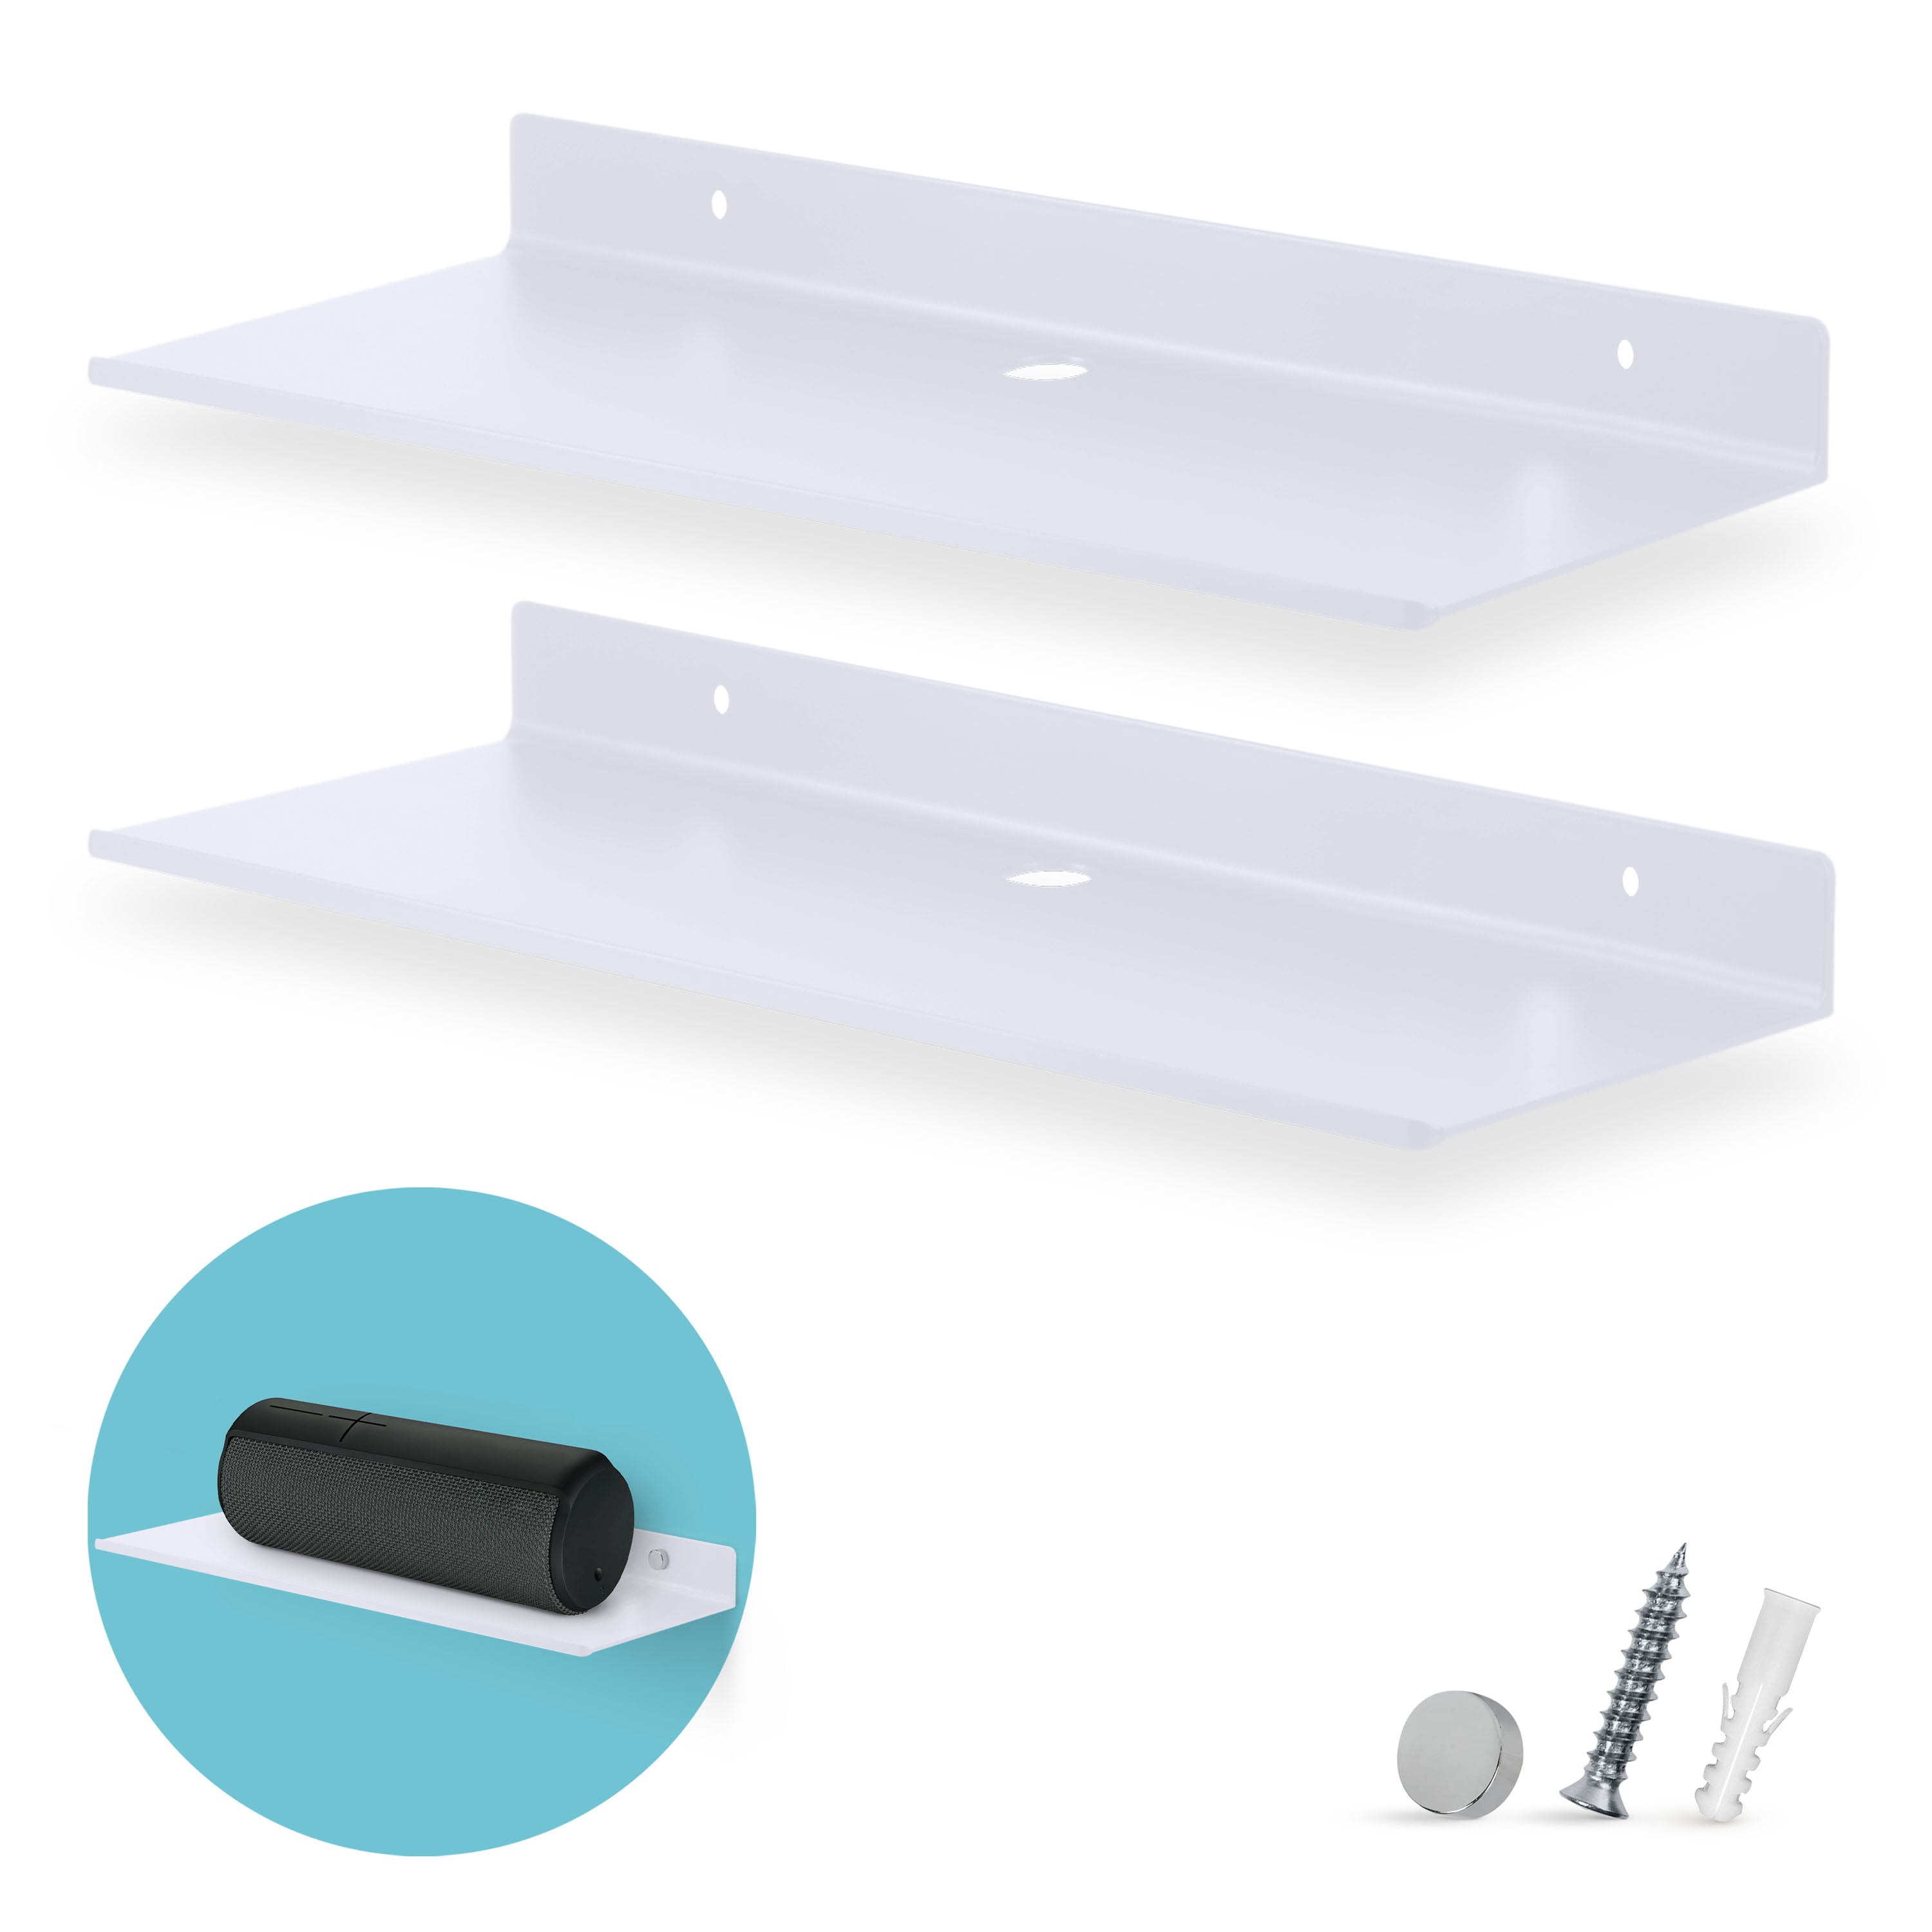 Brainwavz 2-Pack 9” Floating Shelf Bluetooth Speaker Stand, Adhesive & Screw Wall Mount, Anti Slip, for Cameras, Baby Monitors, Webcam, Router, Wide